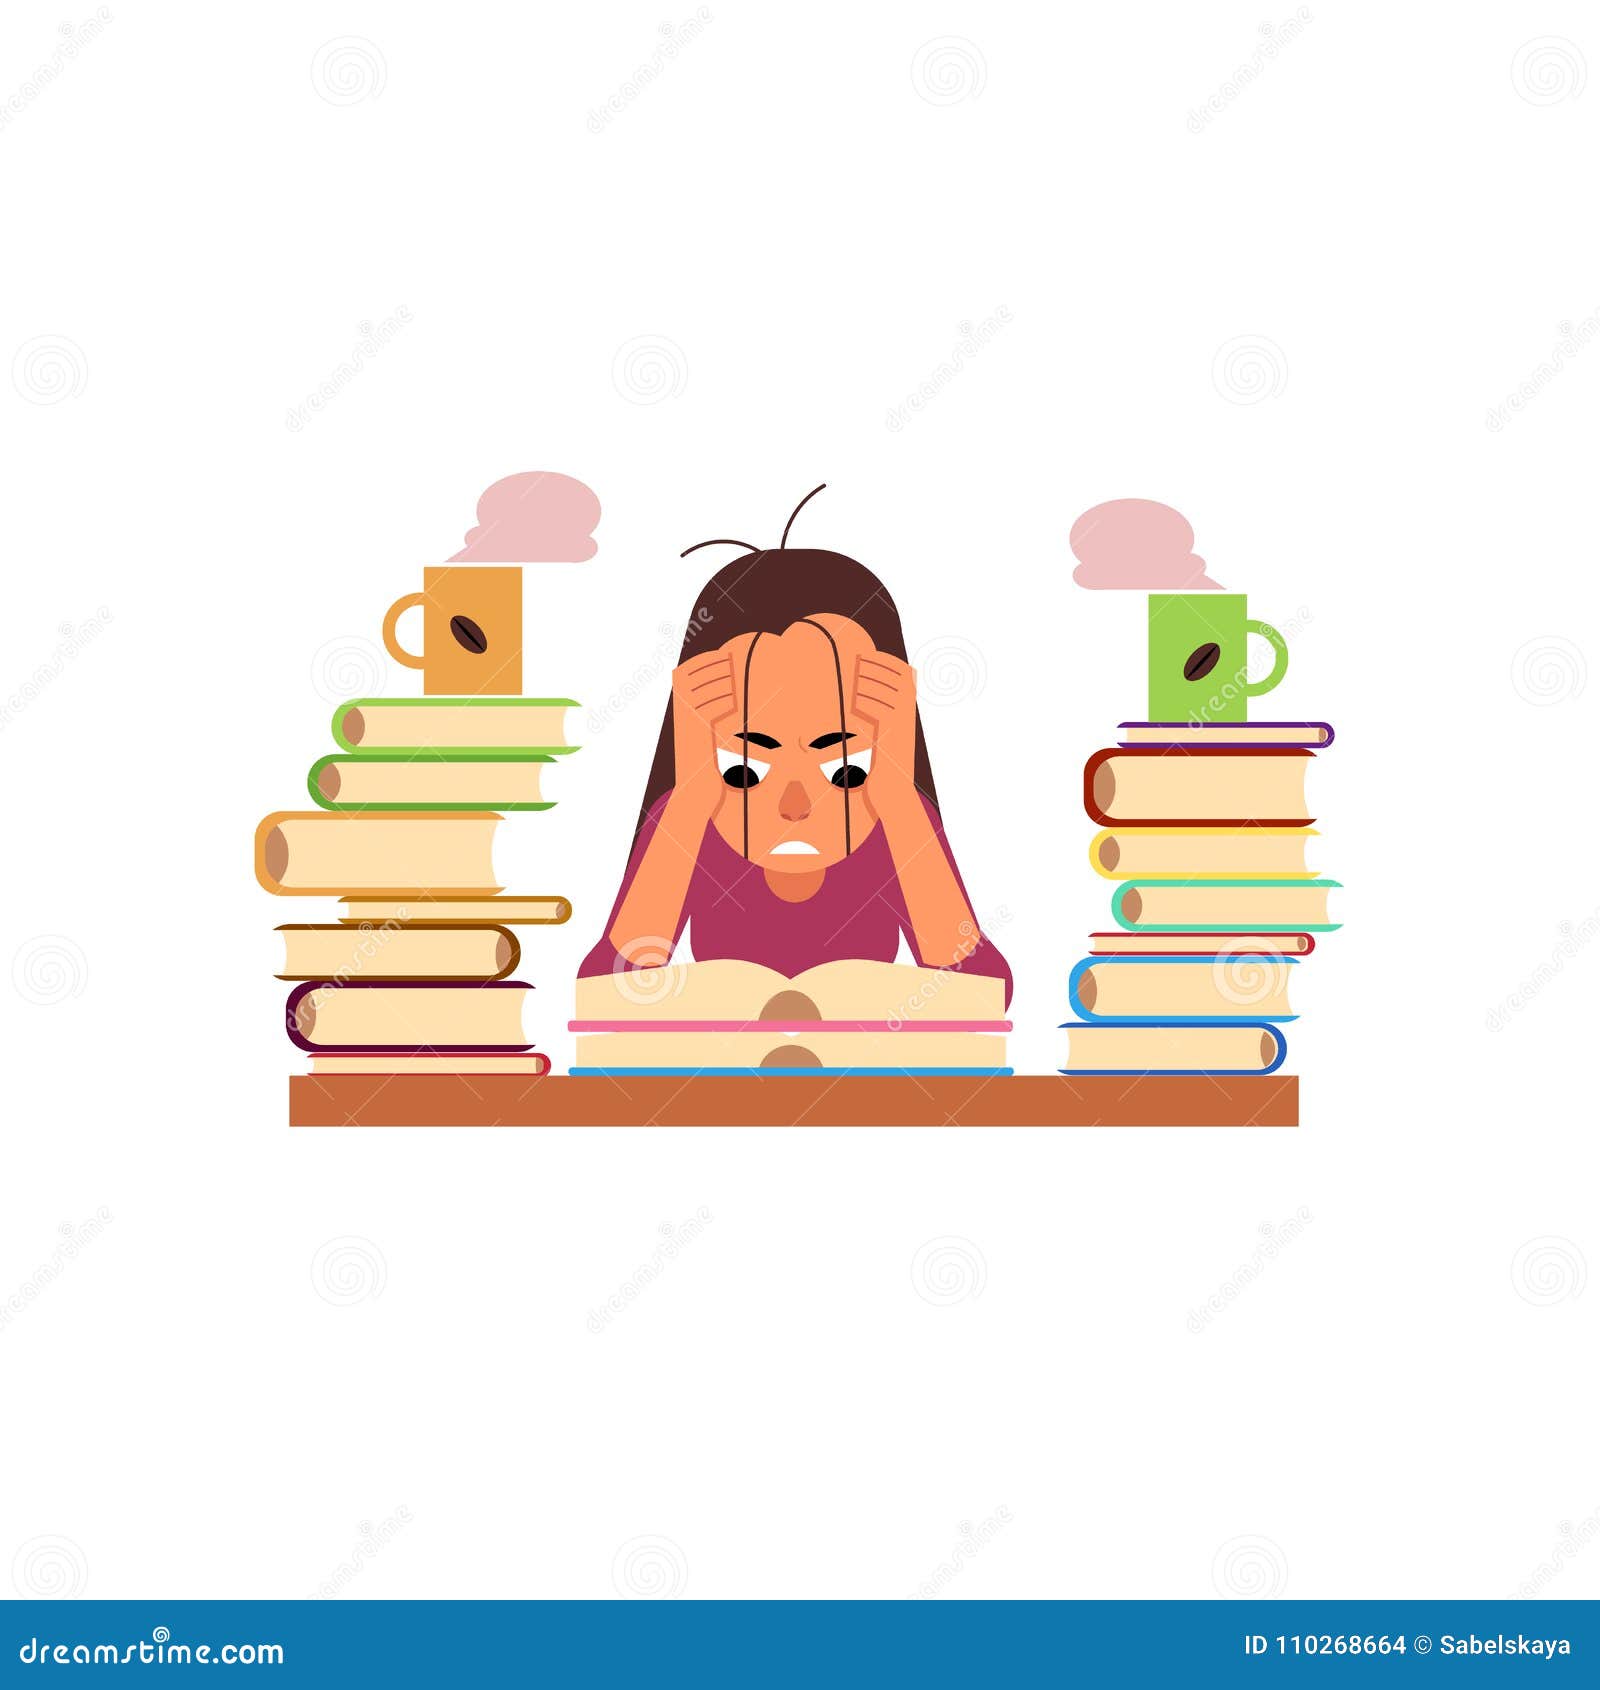 Exhausted Studying Cartoon Stock Illustrations – 268 Exhausted Studying  Cartoon Stock Illustrations, Vectors & Clipart - Dreamstime